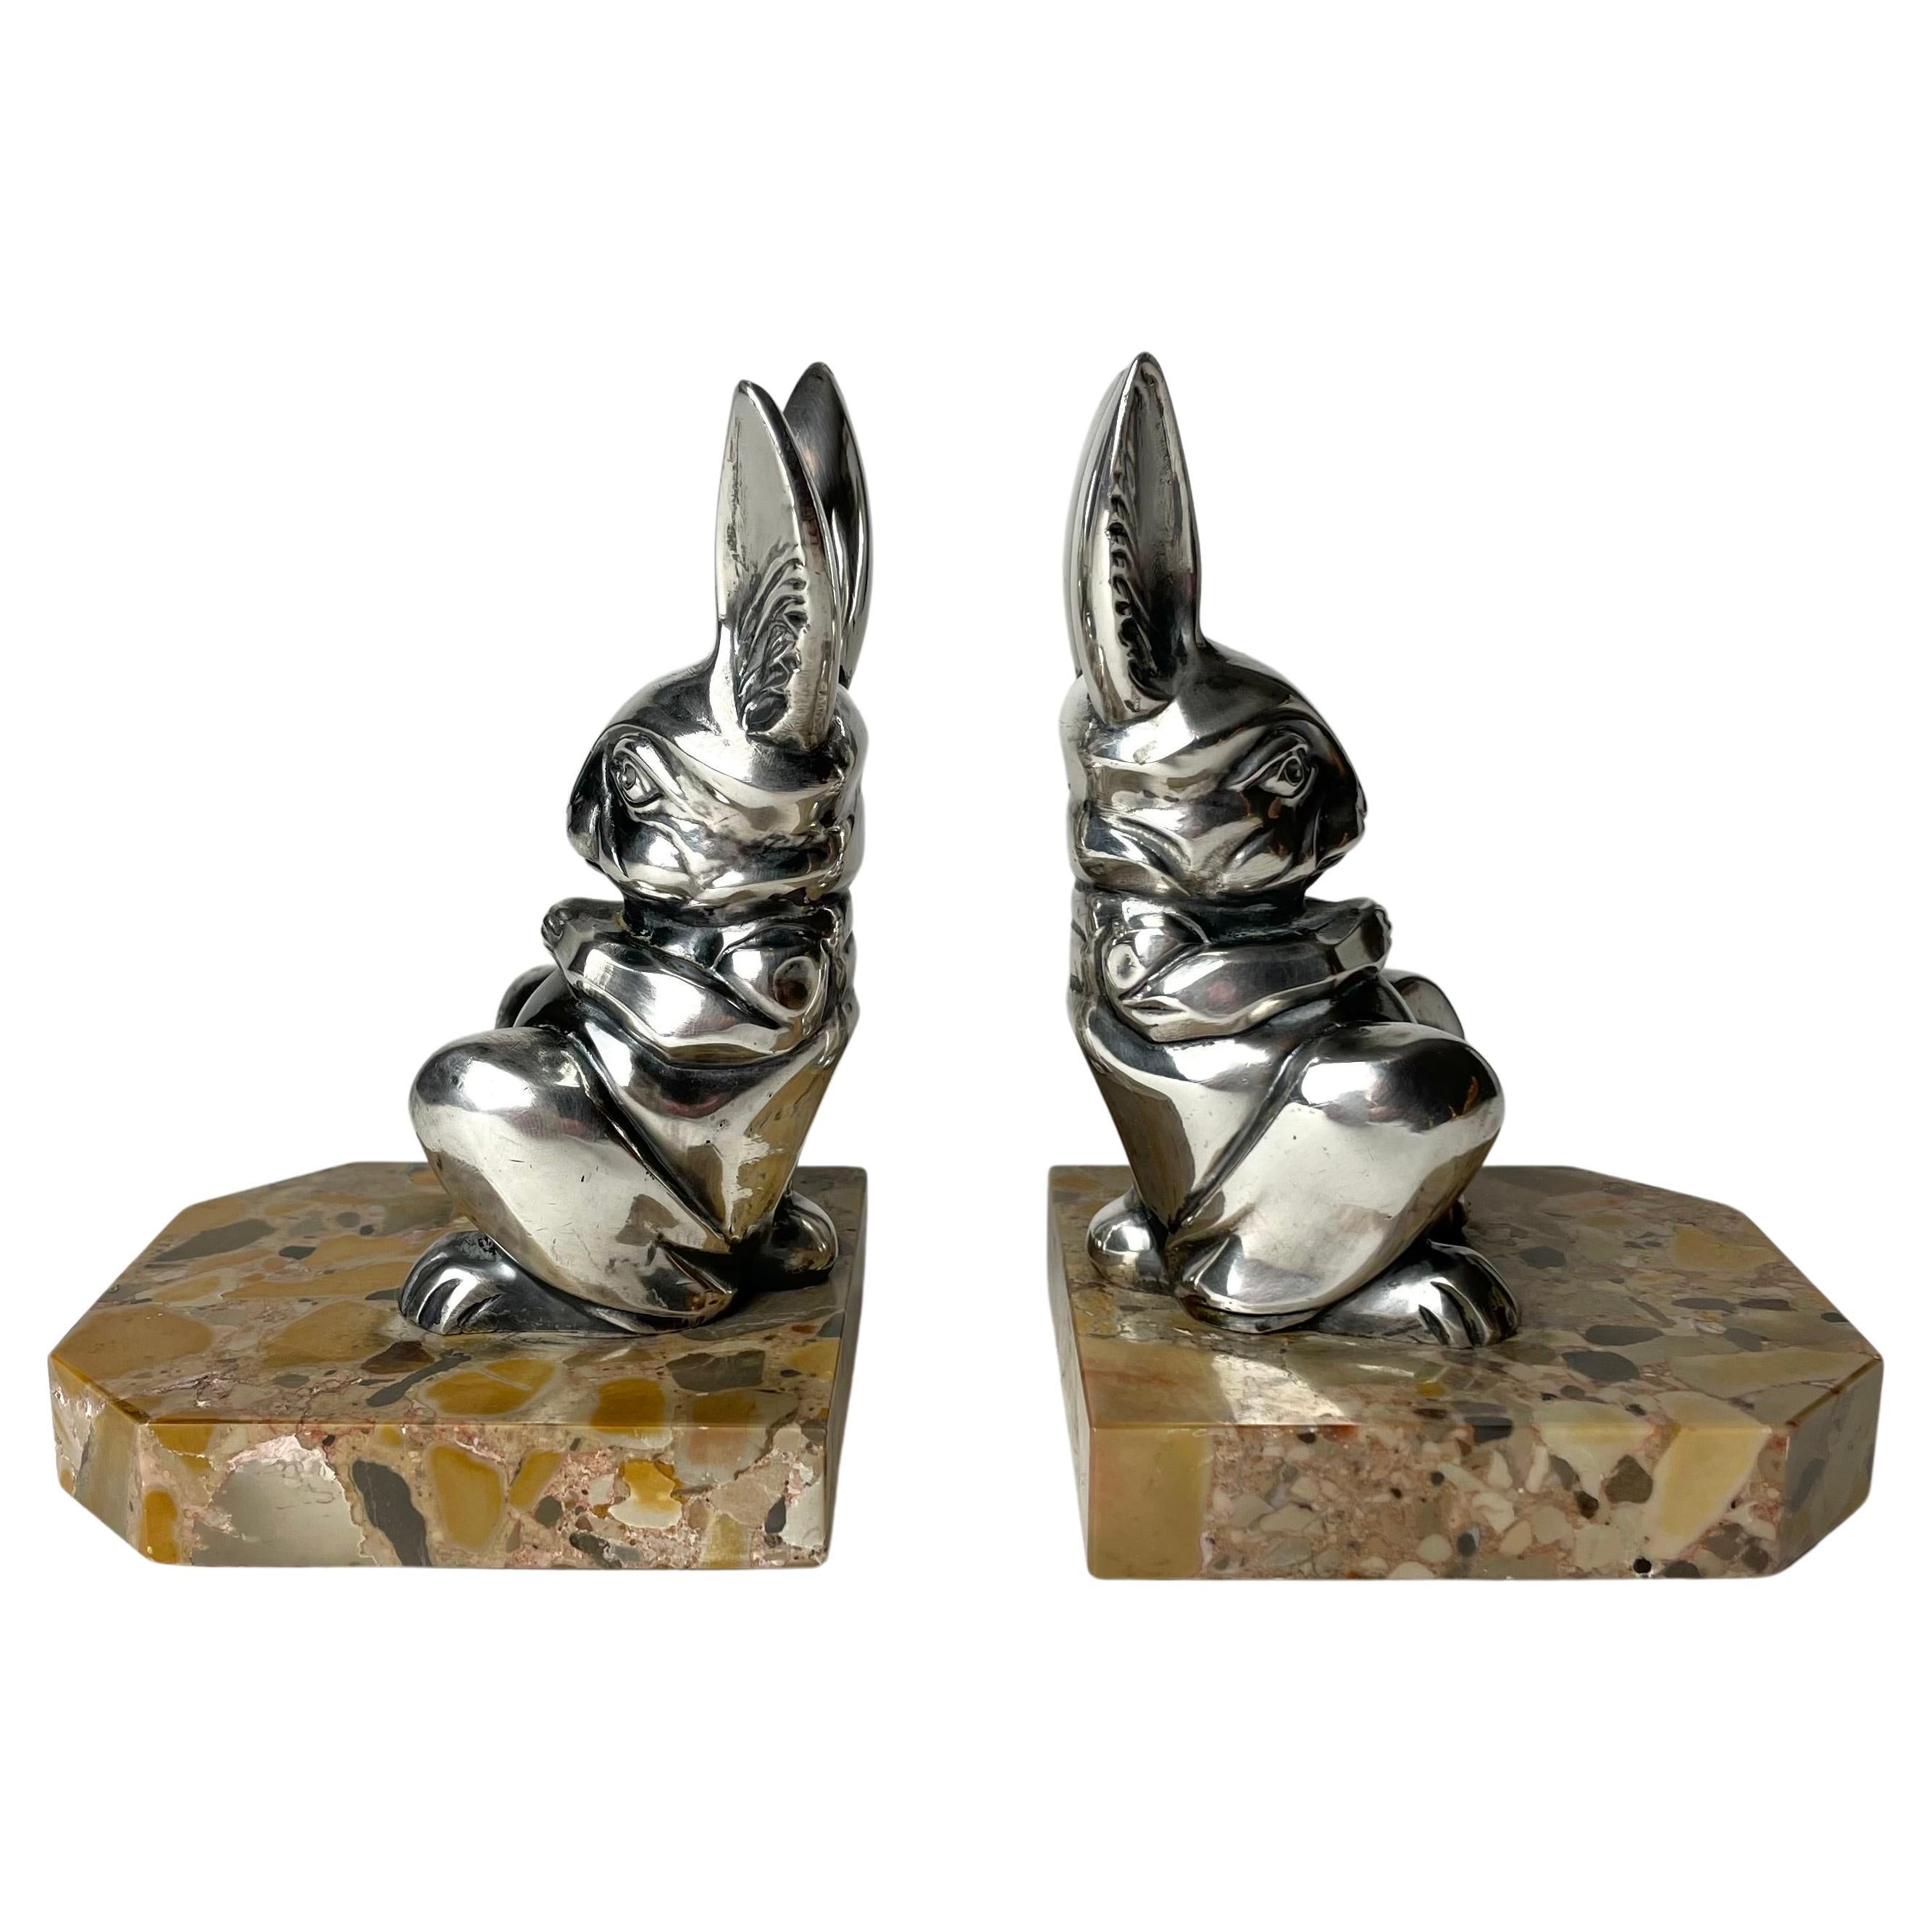 A pair of Cool Art Deco bookends from the 1920s by Hippolyte Moreau